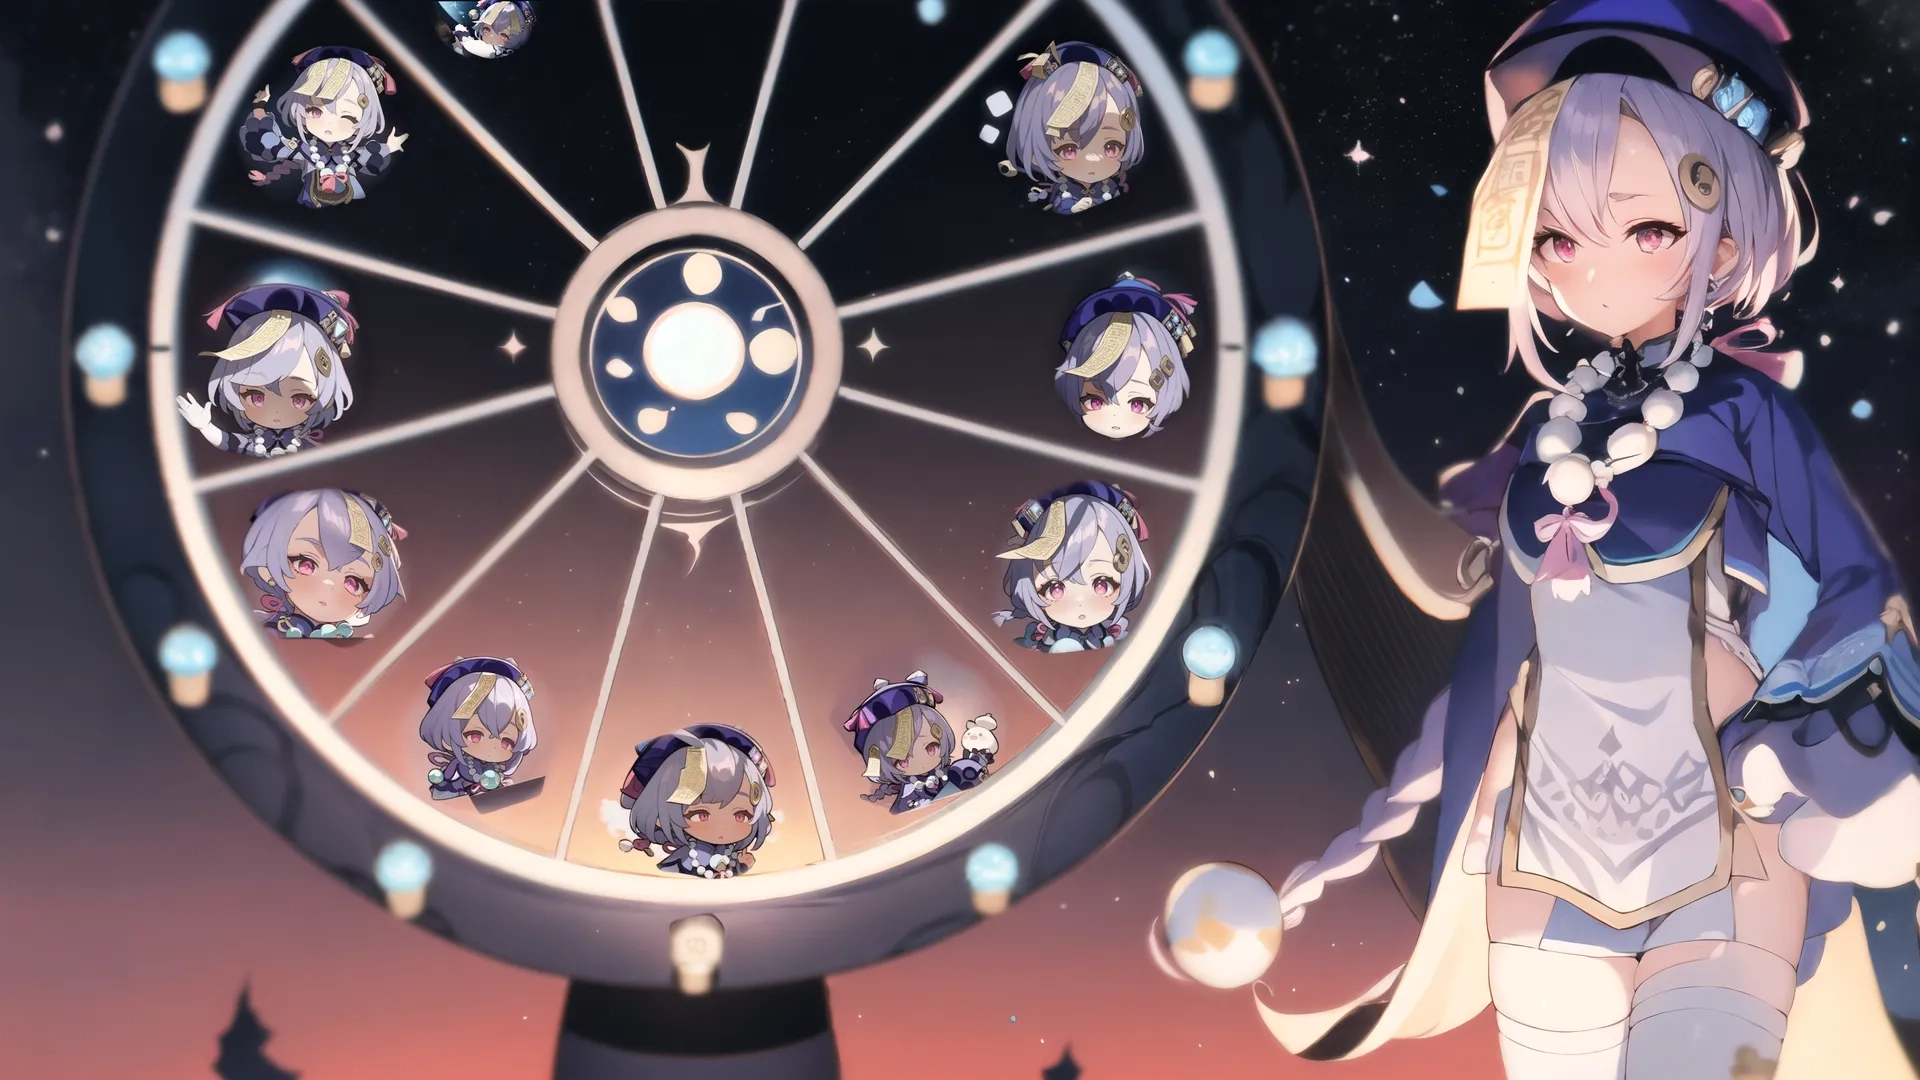 a female anime character standing in front of a clock wheel, with a bunch of small animated faces behind it on a colorful wallpaper background,
